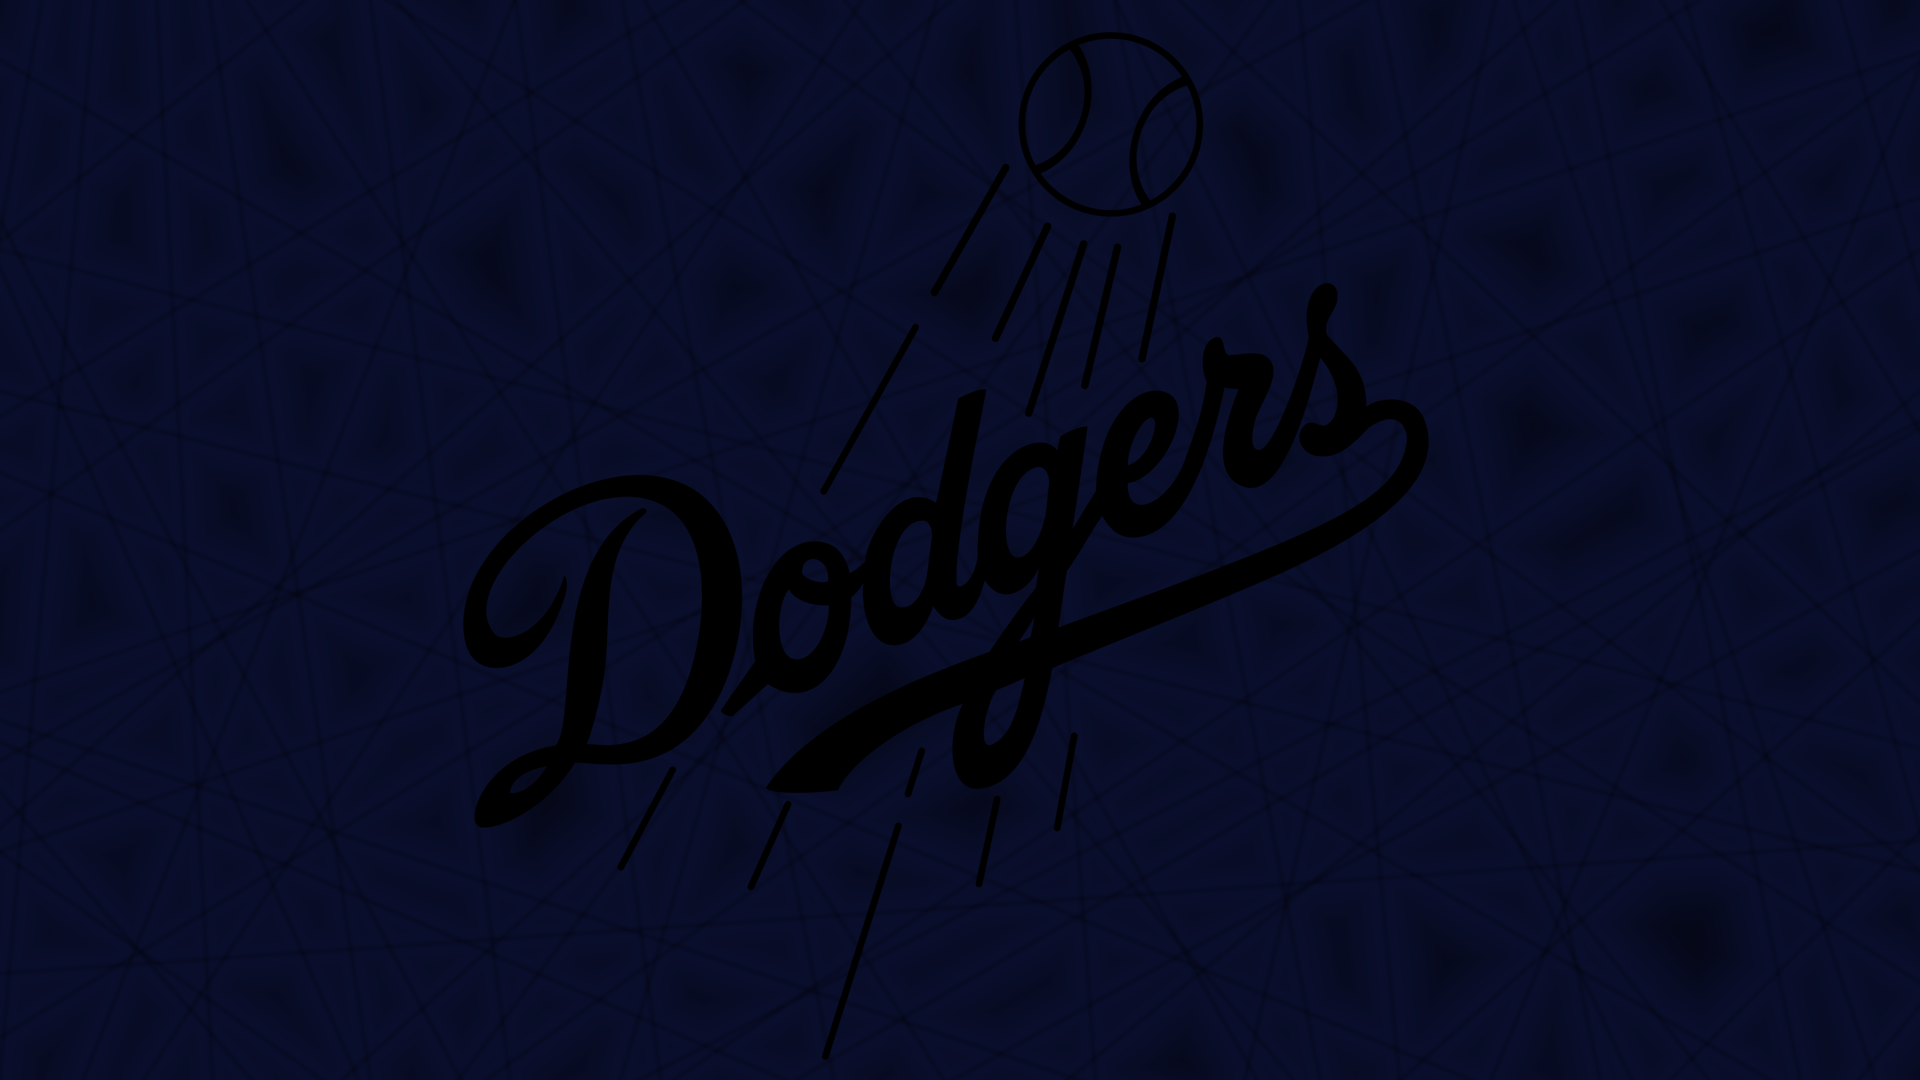 Dodgers Backgrounds